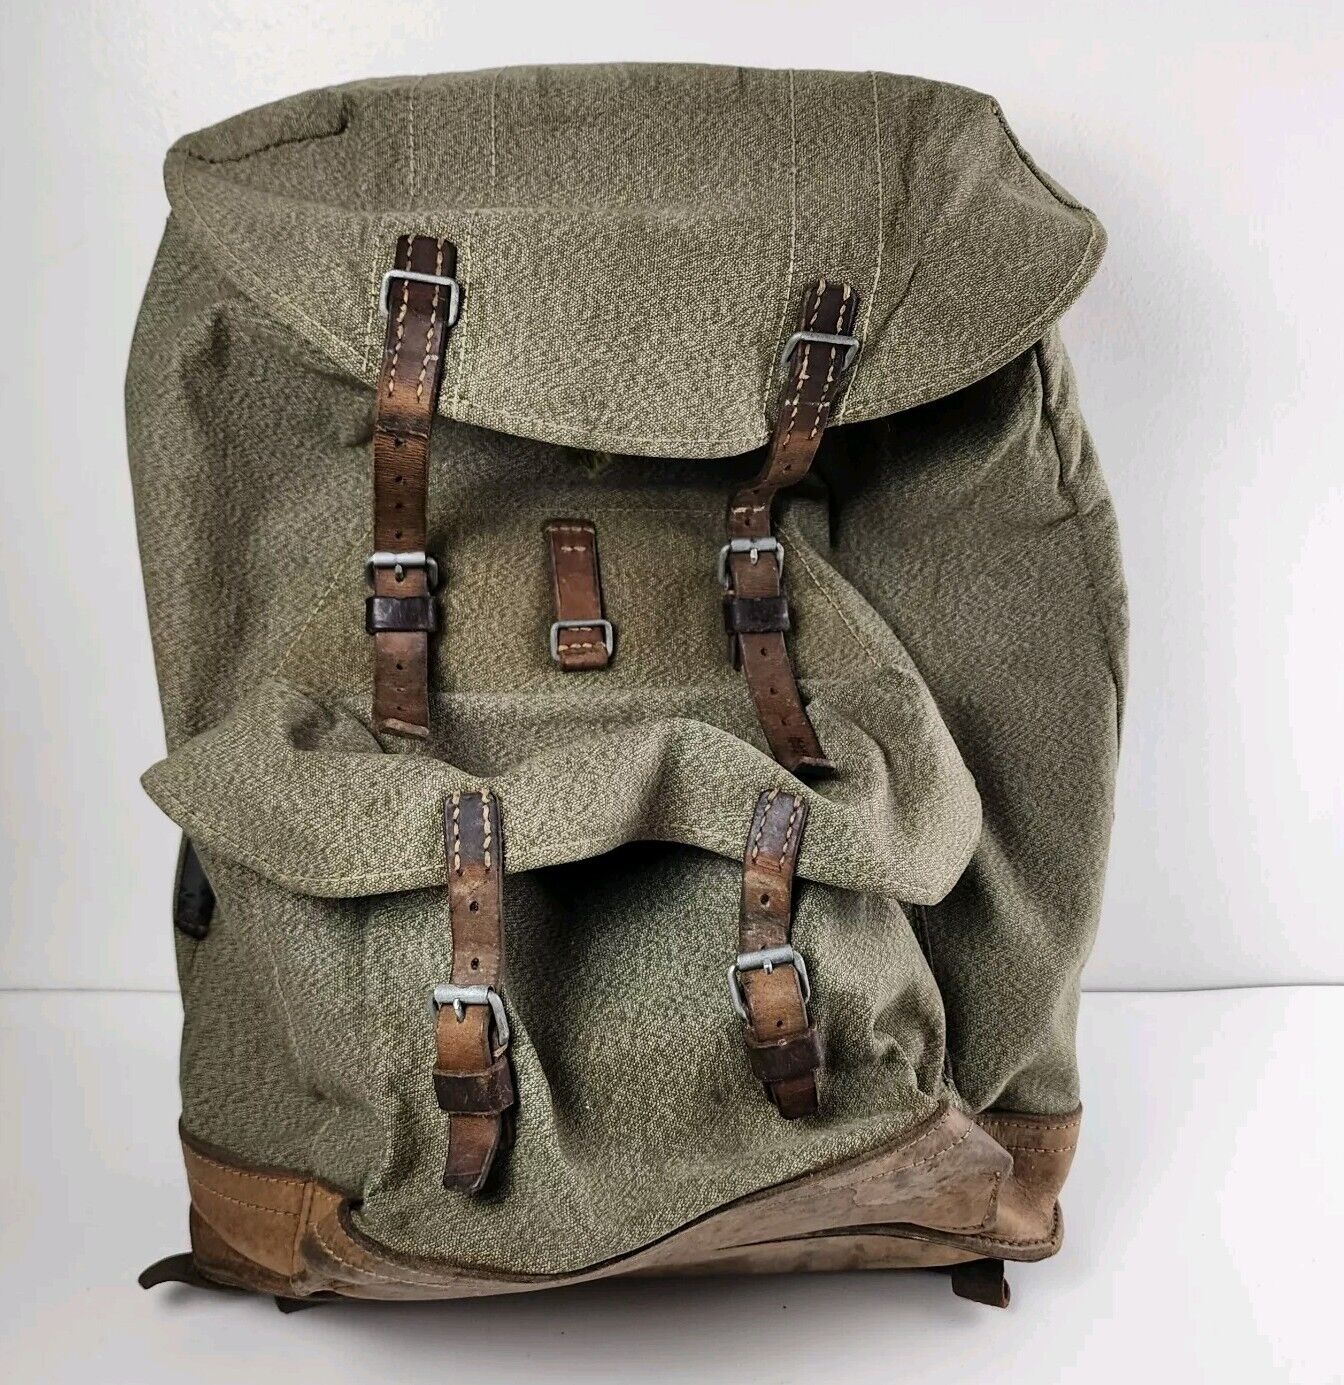 Swiss Army Sattler Backpack Salt and Pepper Military Leather Canvas 1964 Vintage